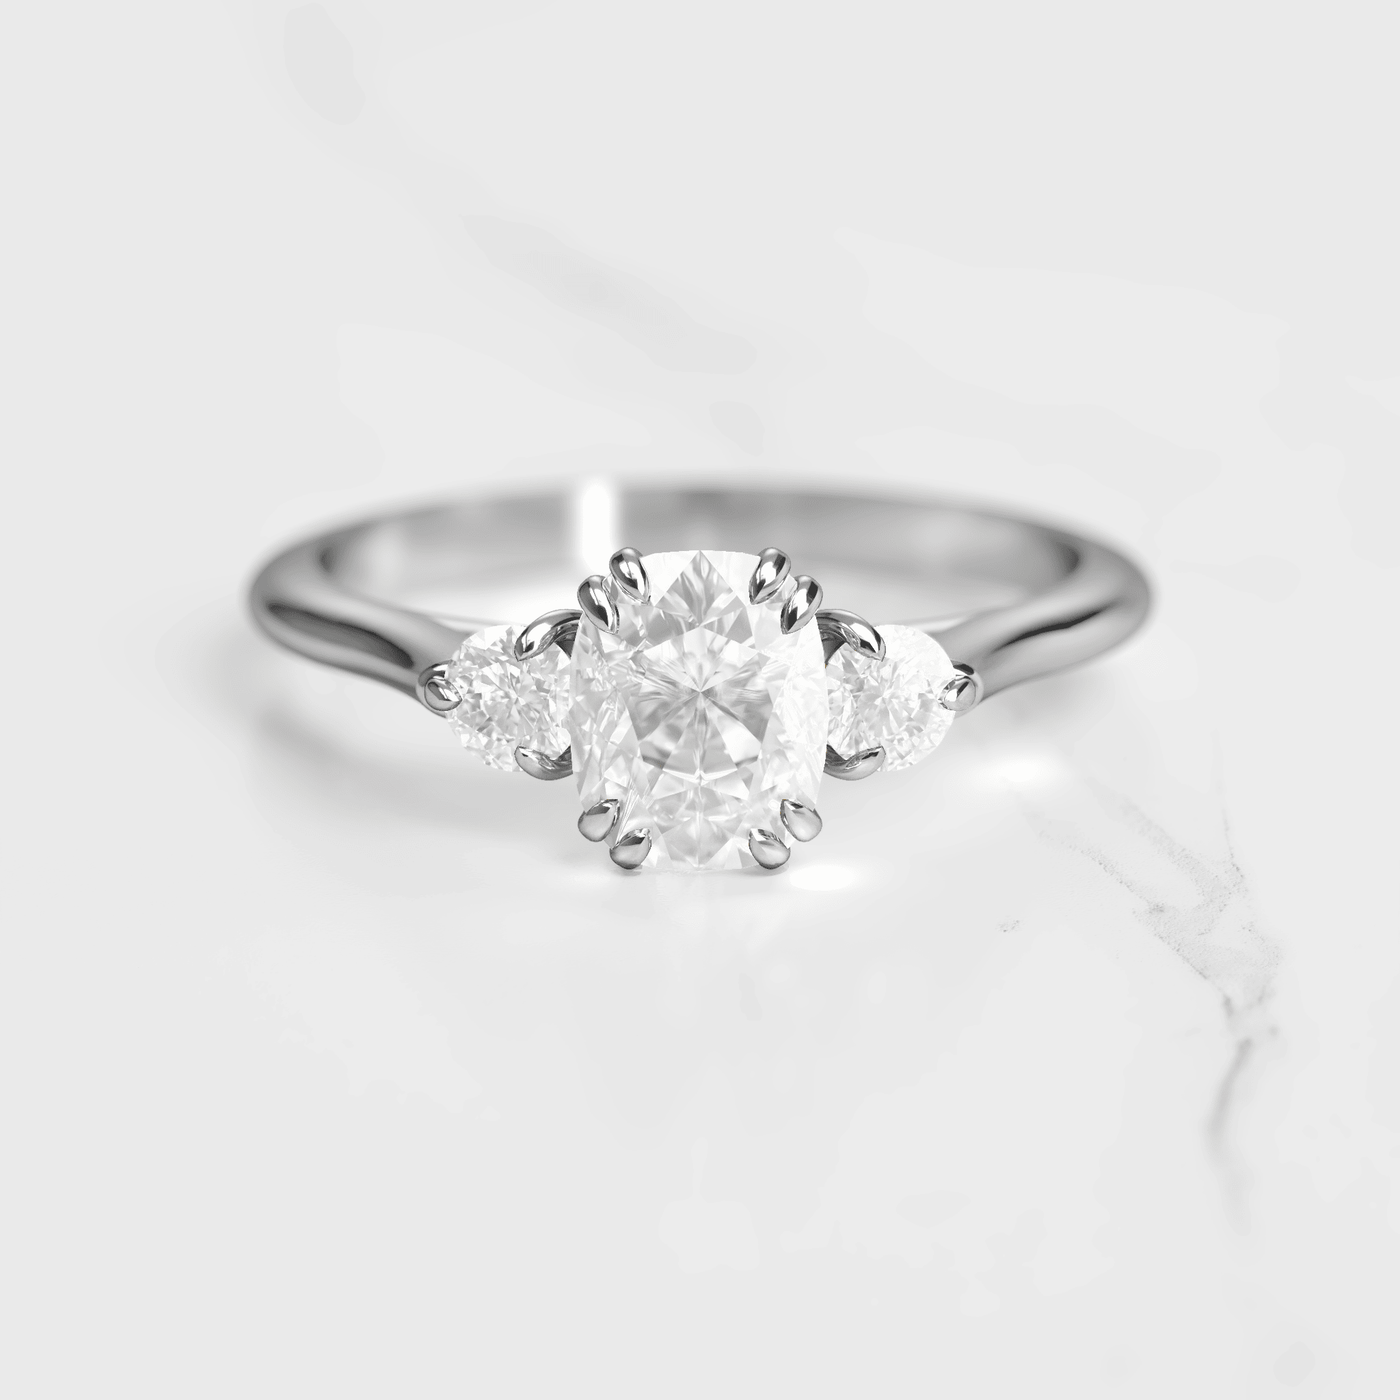 A 14k yellow gold engagement ring with a cushion-cut white diamond center stone and two round white diamond accent stones on either side